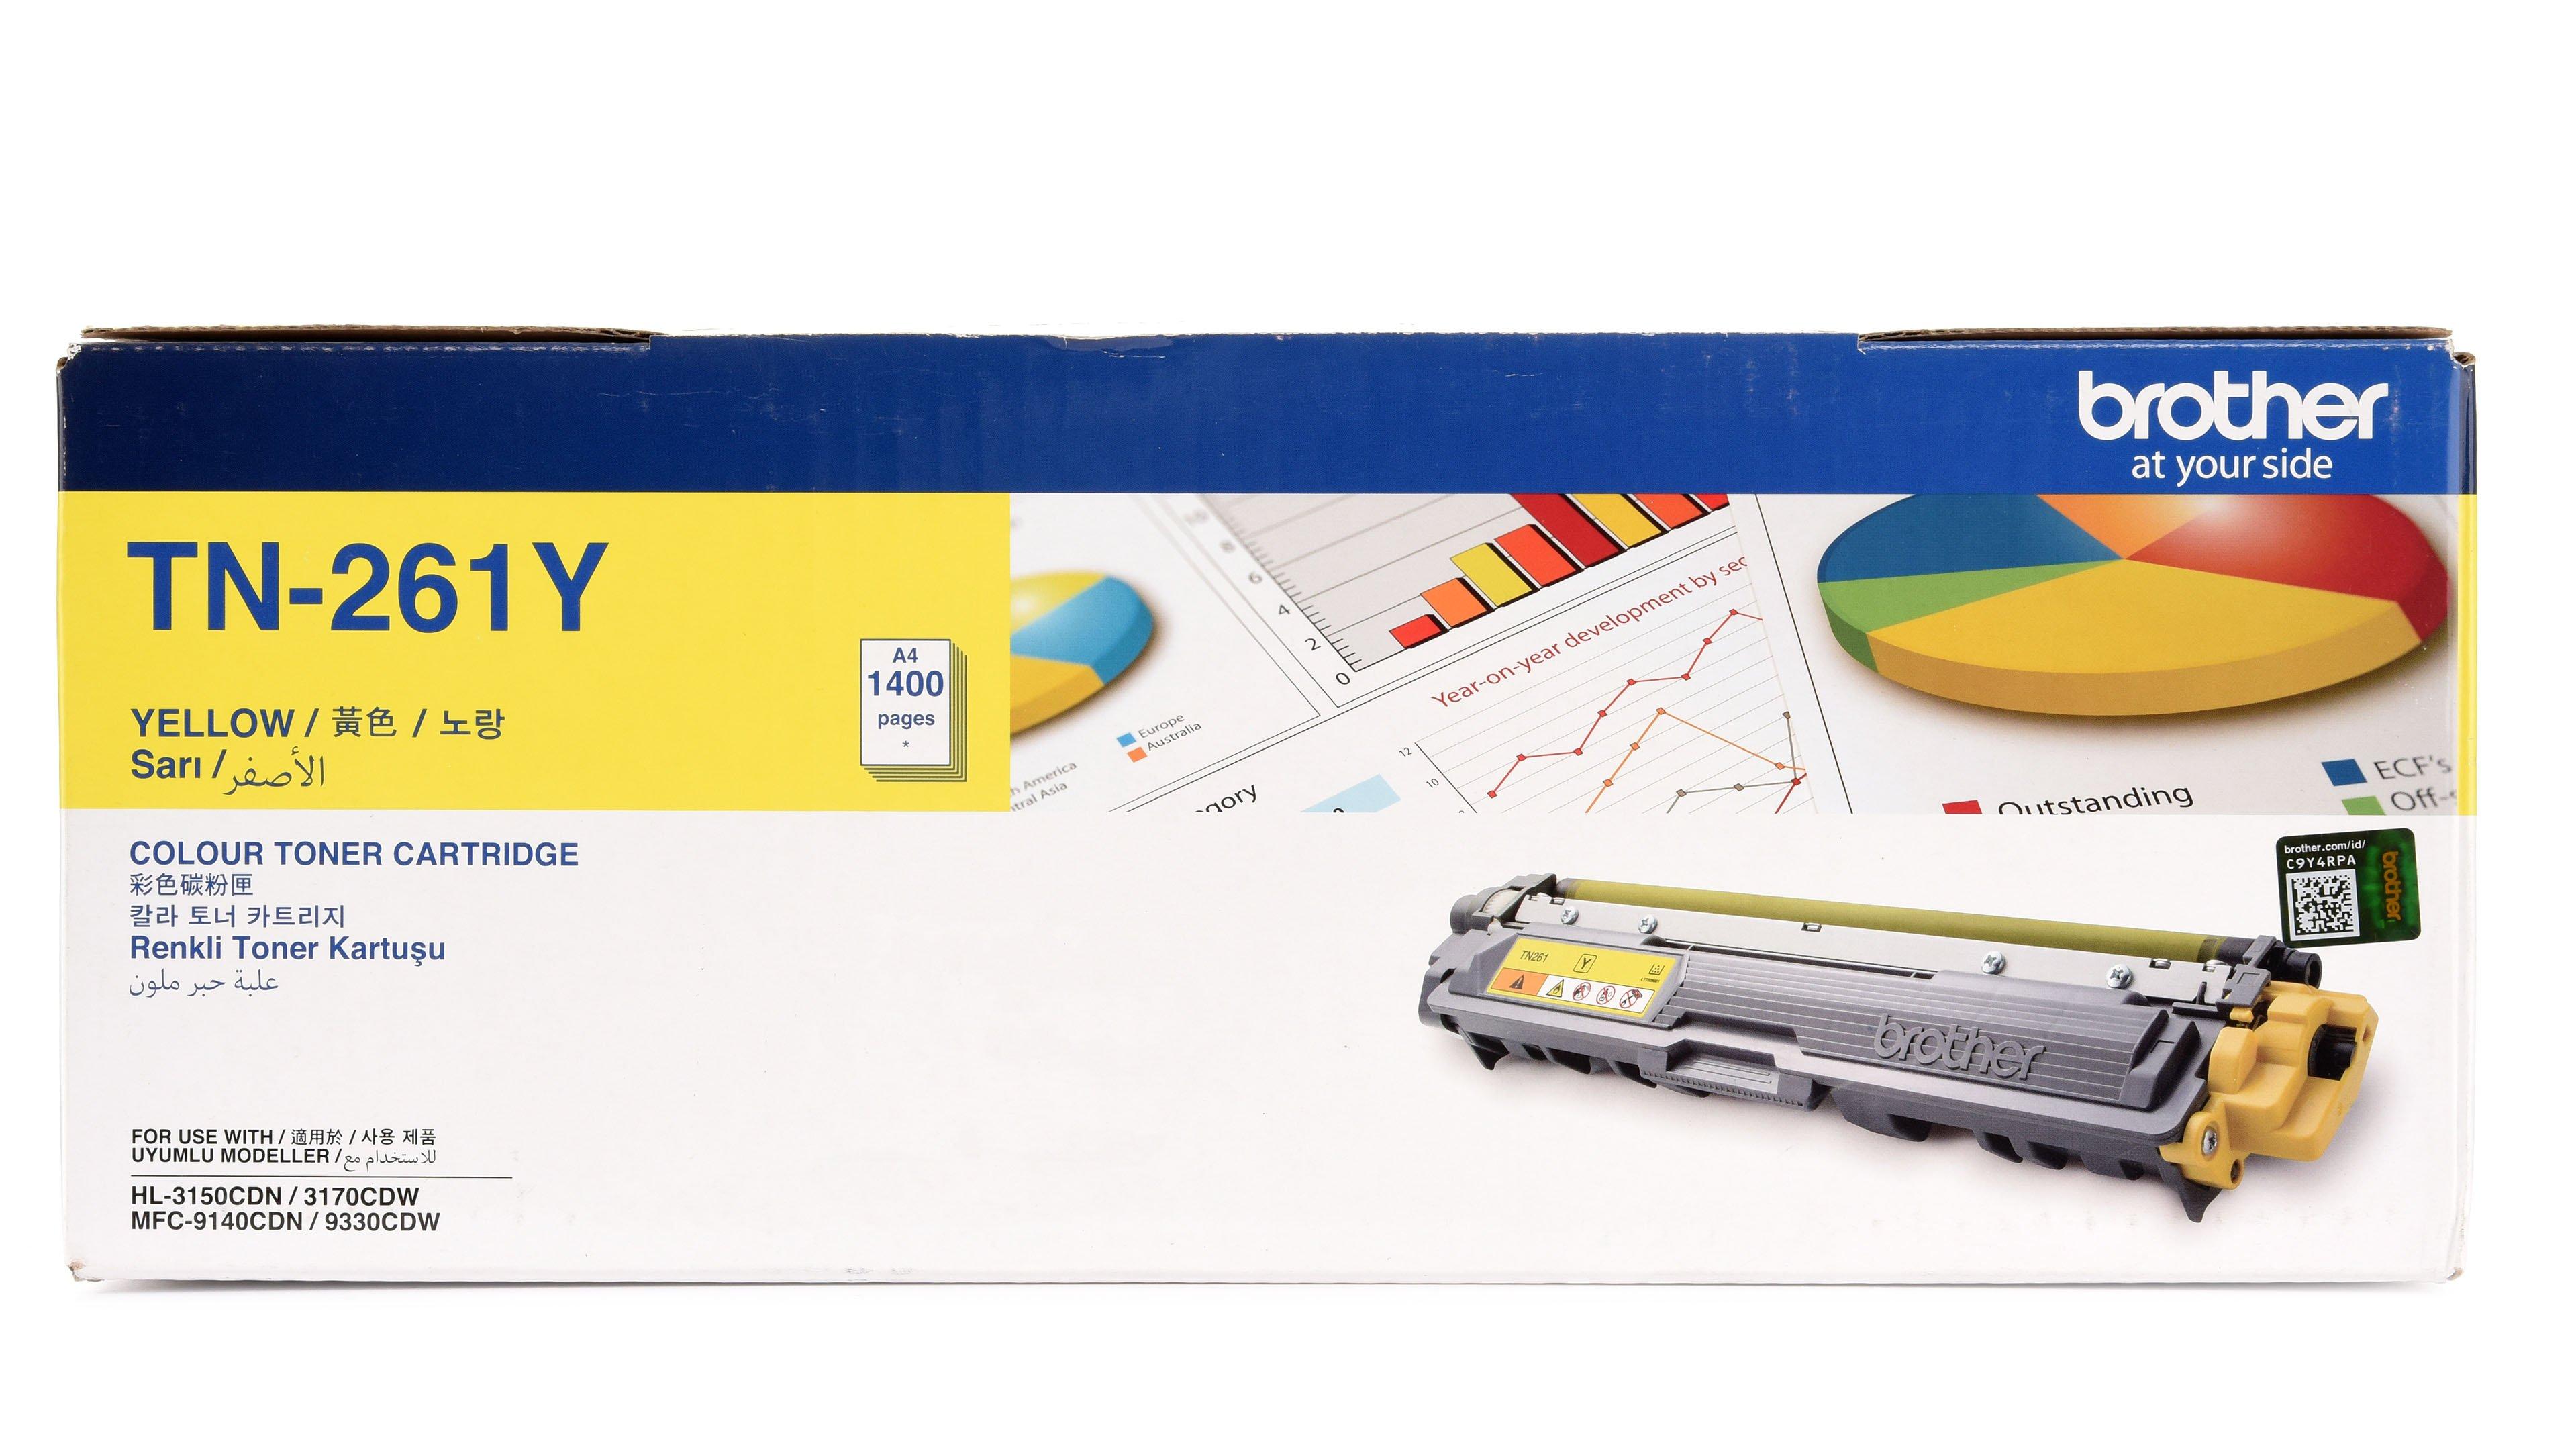 Seminario Mula colchón Brother Toner Cartridge Yellow, mfc-9330cdw,yield 1400 pages - eXtra Oman